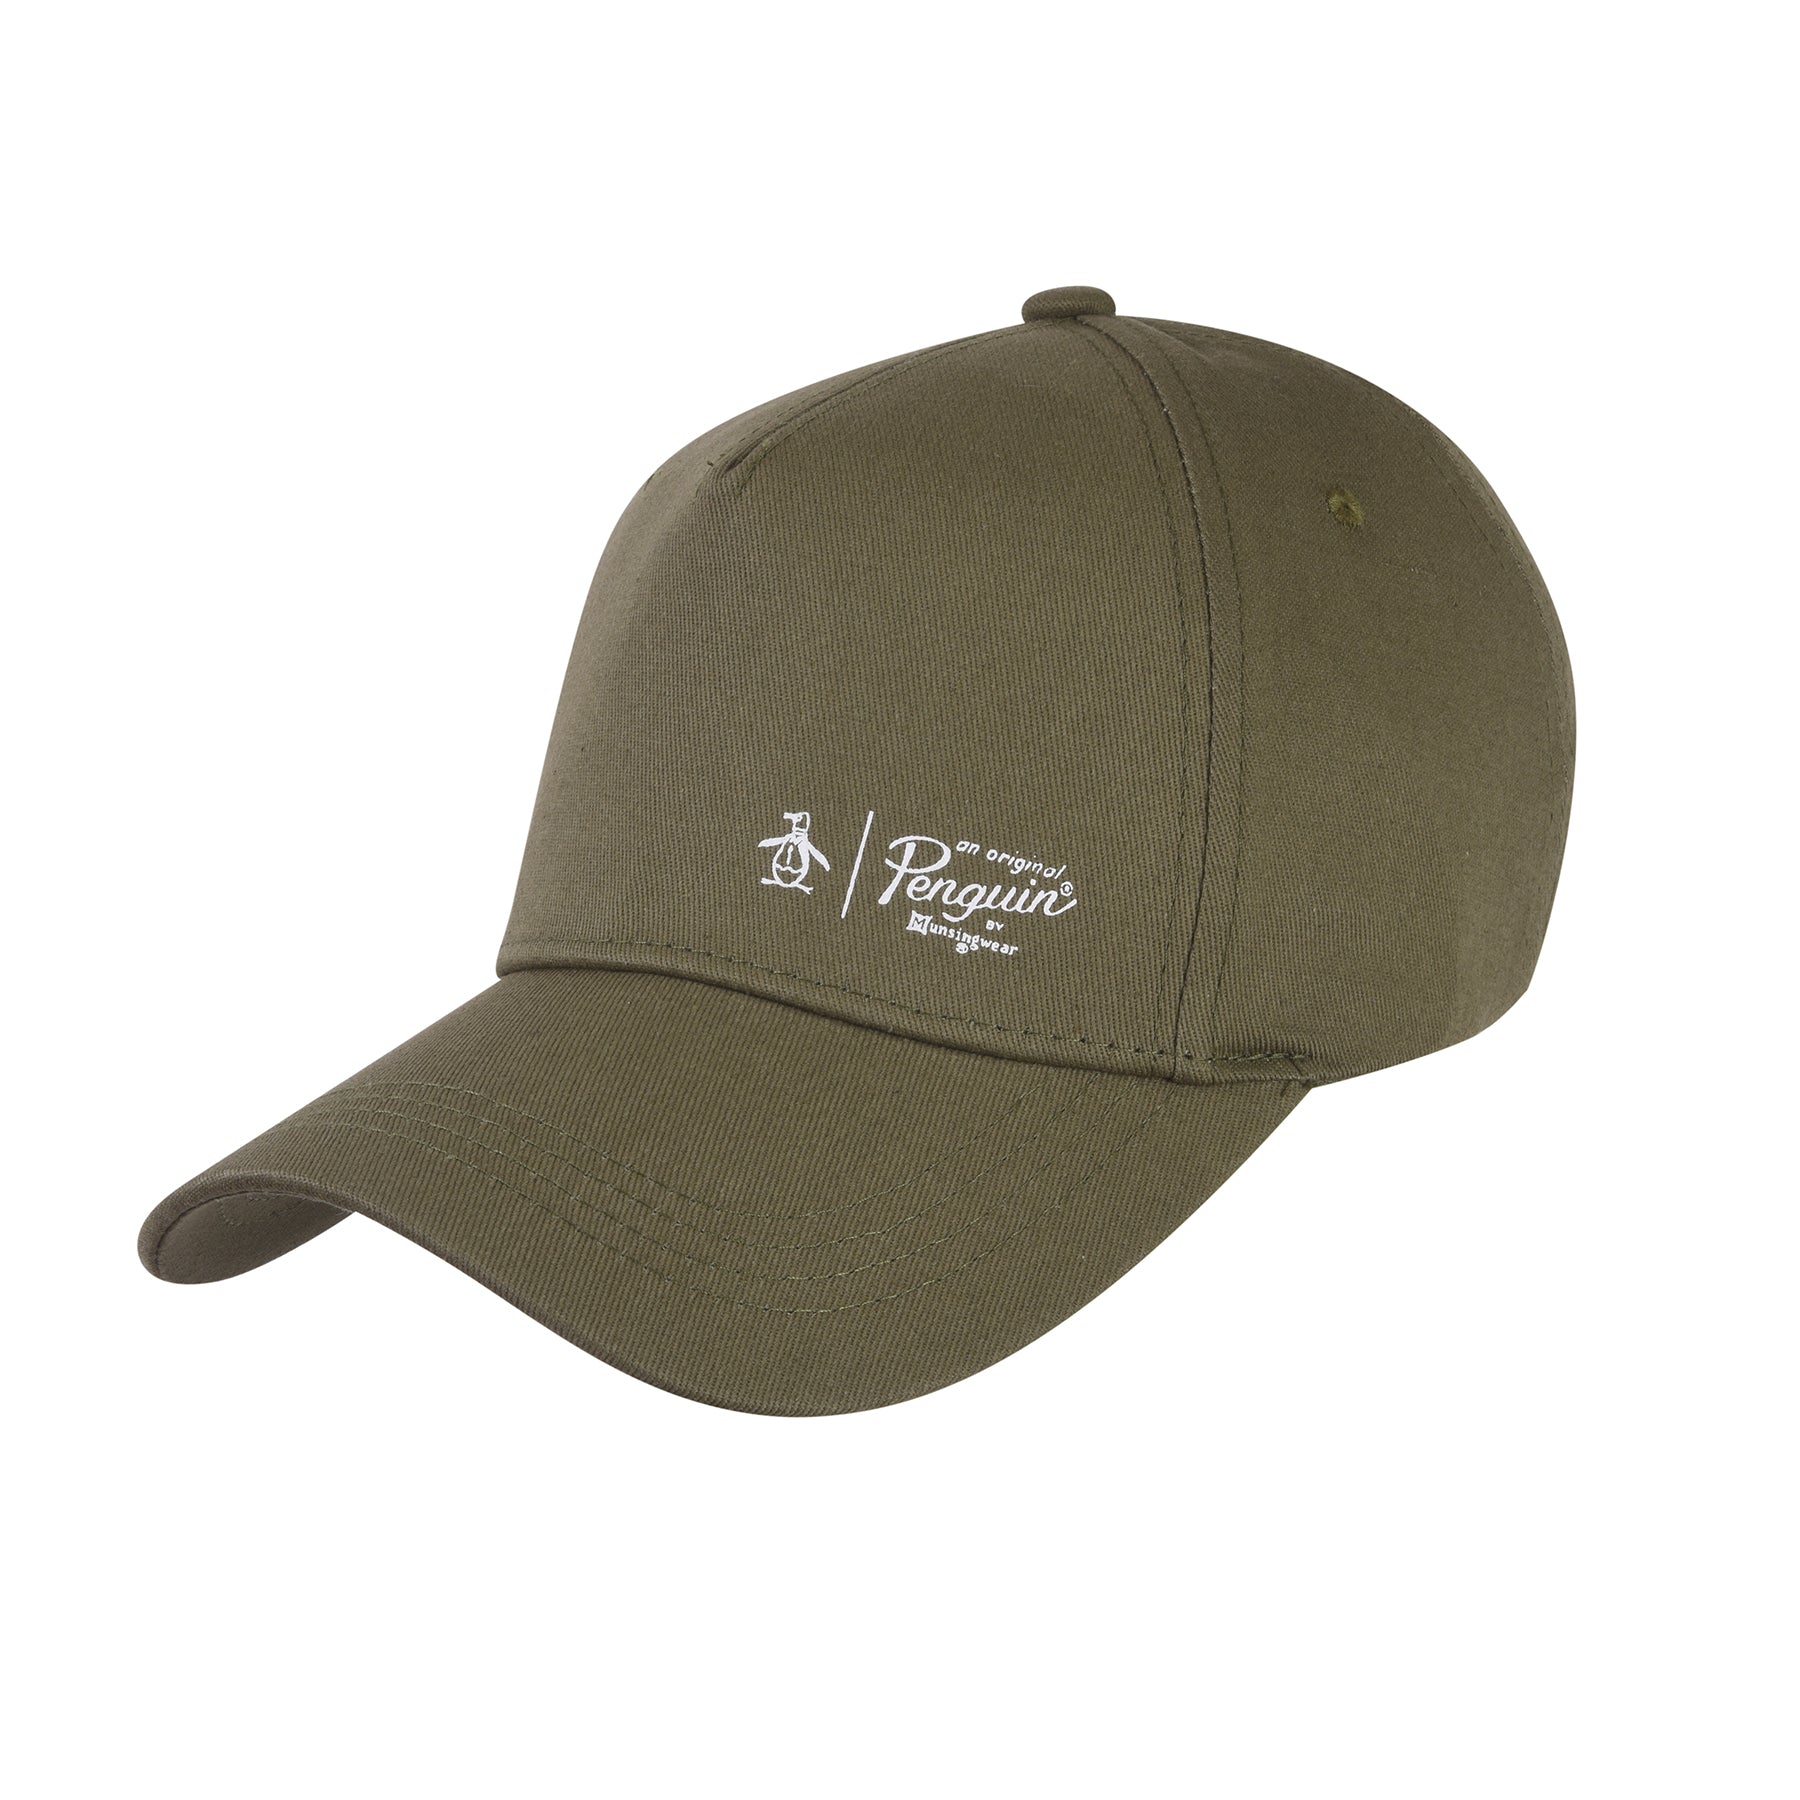 View Stephen Basic 6 Panel Cap In Green information